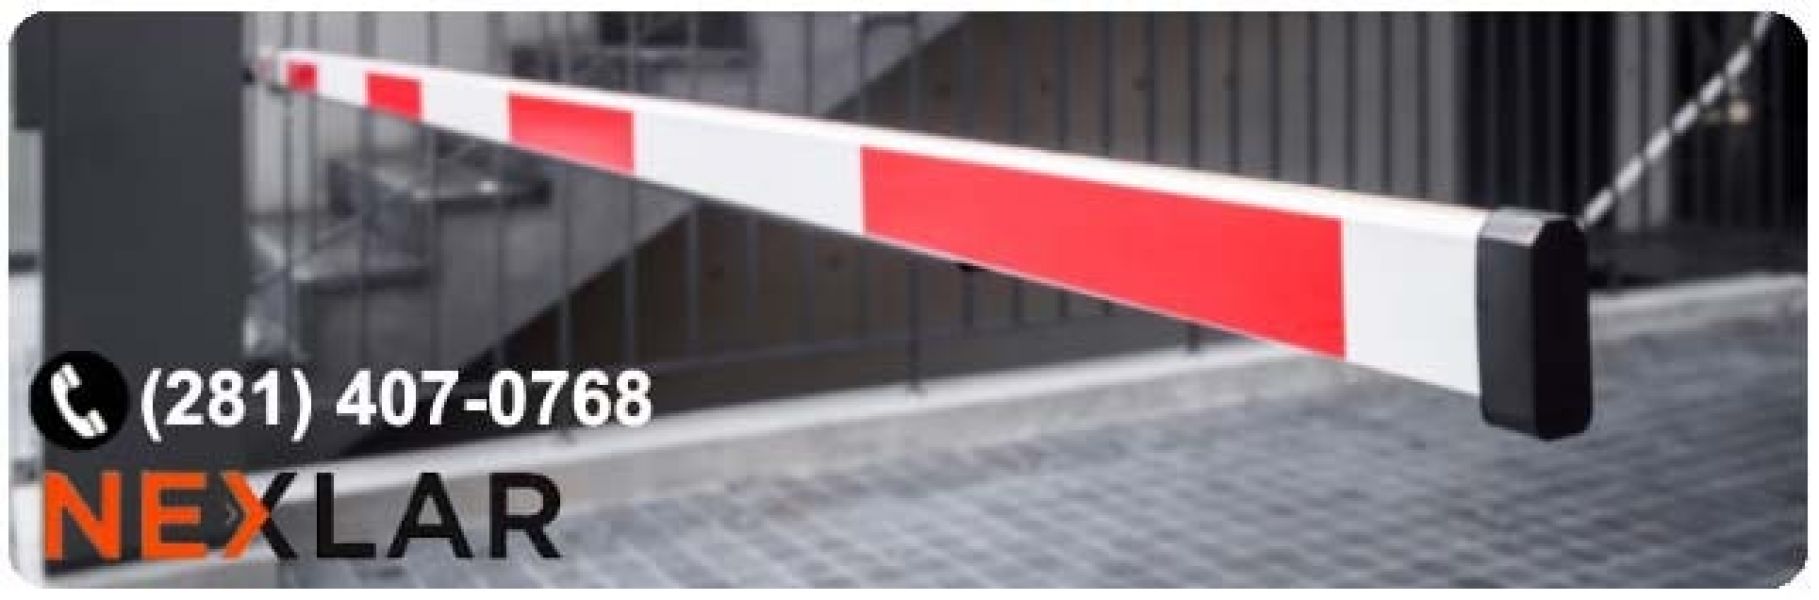 Best Commercial Parking Lot Gate Systems - Nexlar Security